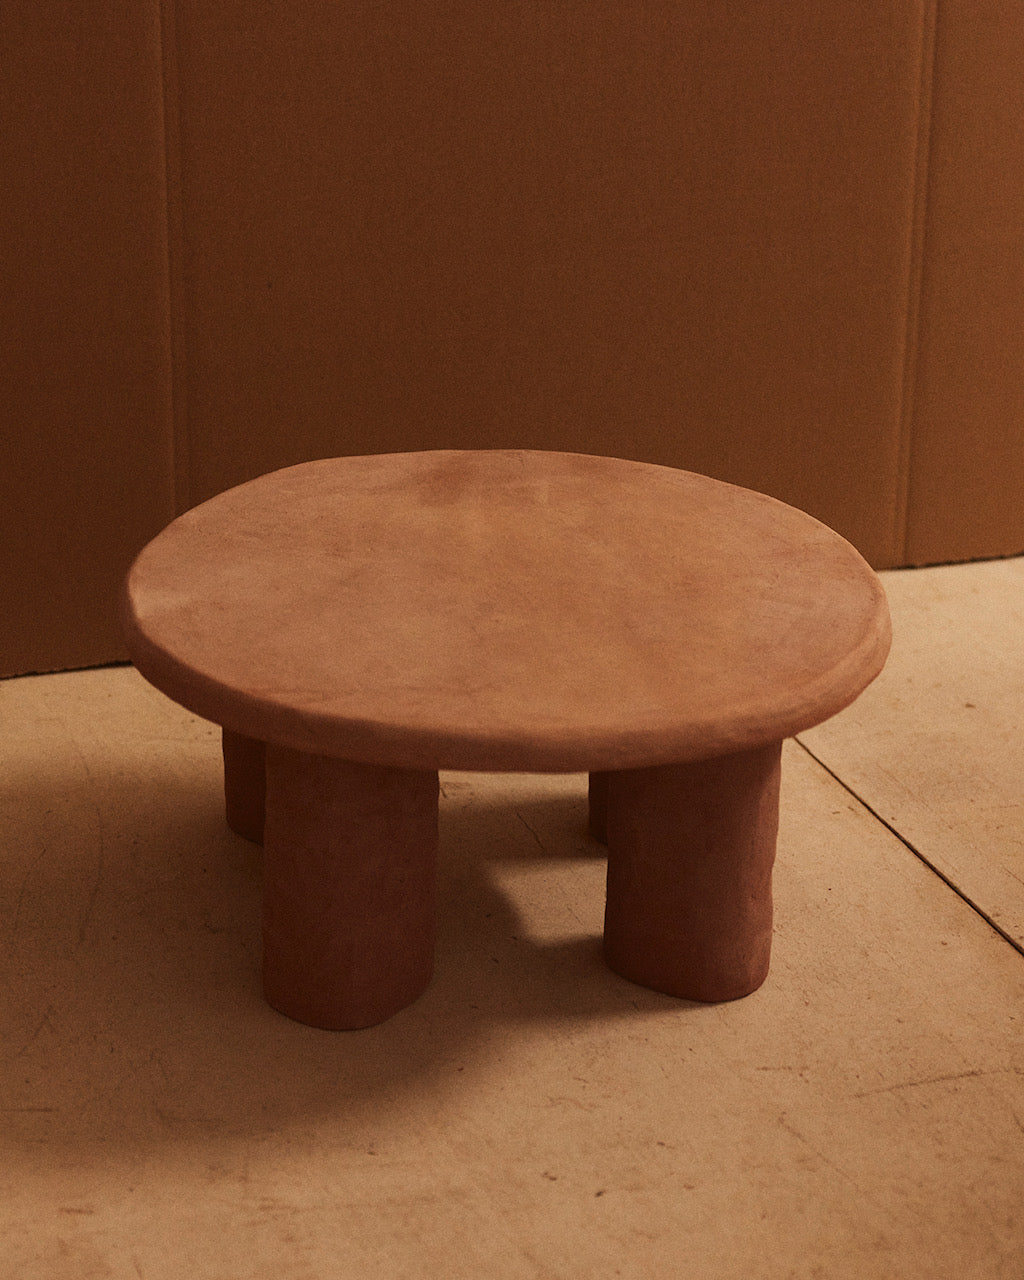 F. II Low. Ceramic Accent Table. One-of-a-kind. Low, round ceramic end table with a sculptural, hand-formed appearance in natural clay stoneware by Spanish artist Marta Bonilla. 